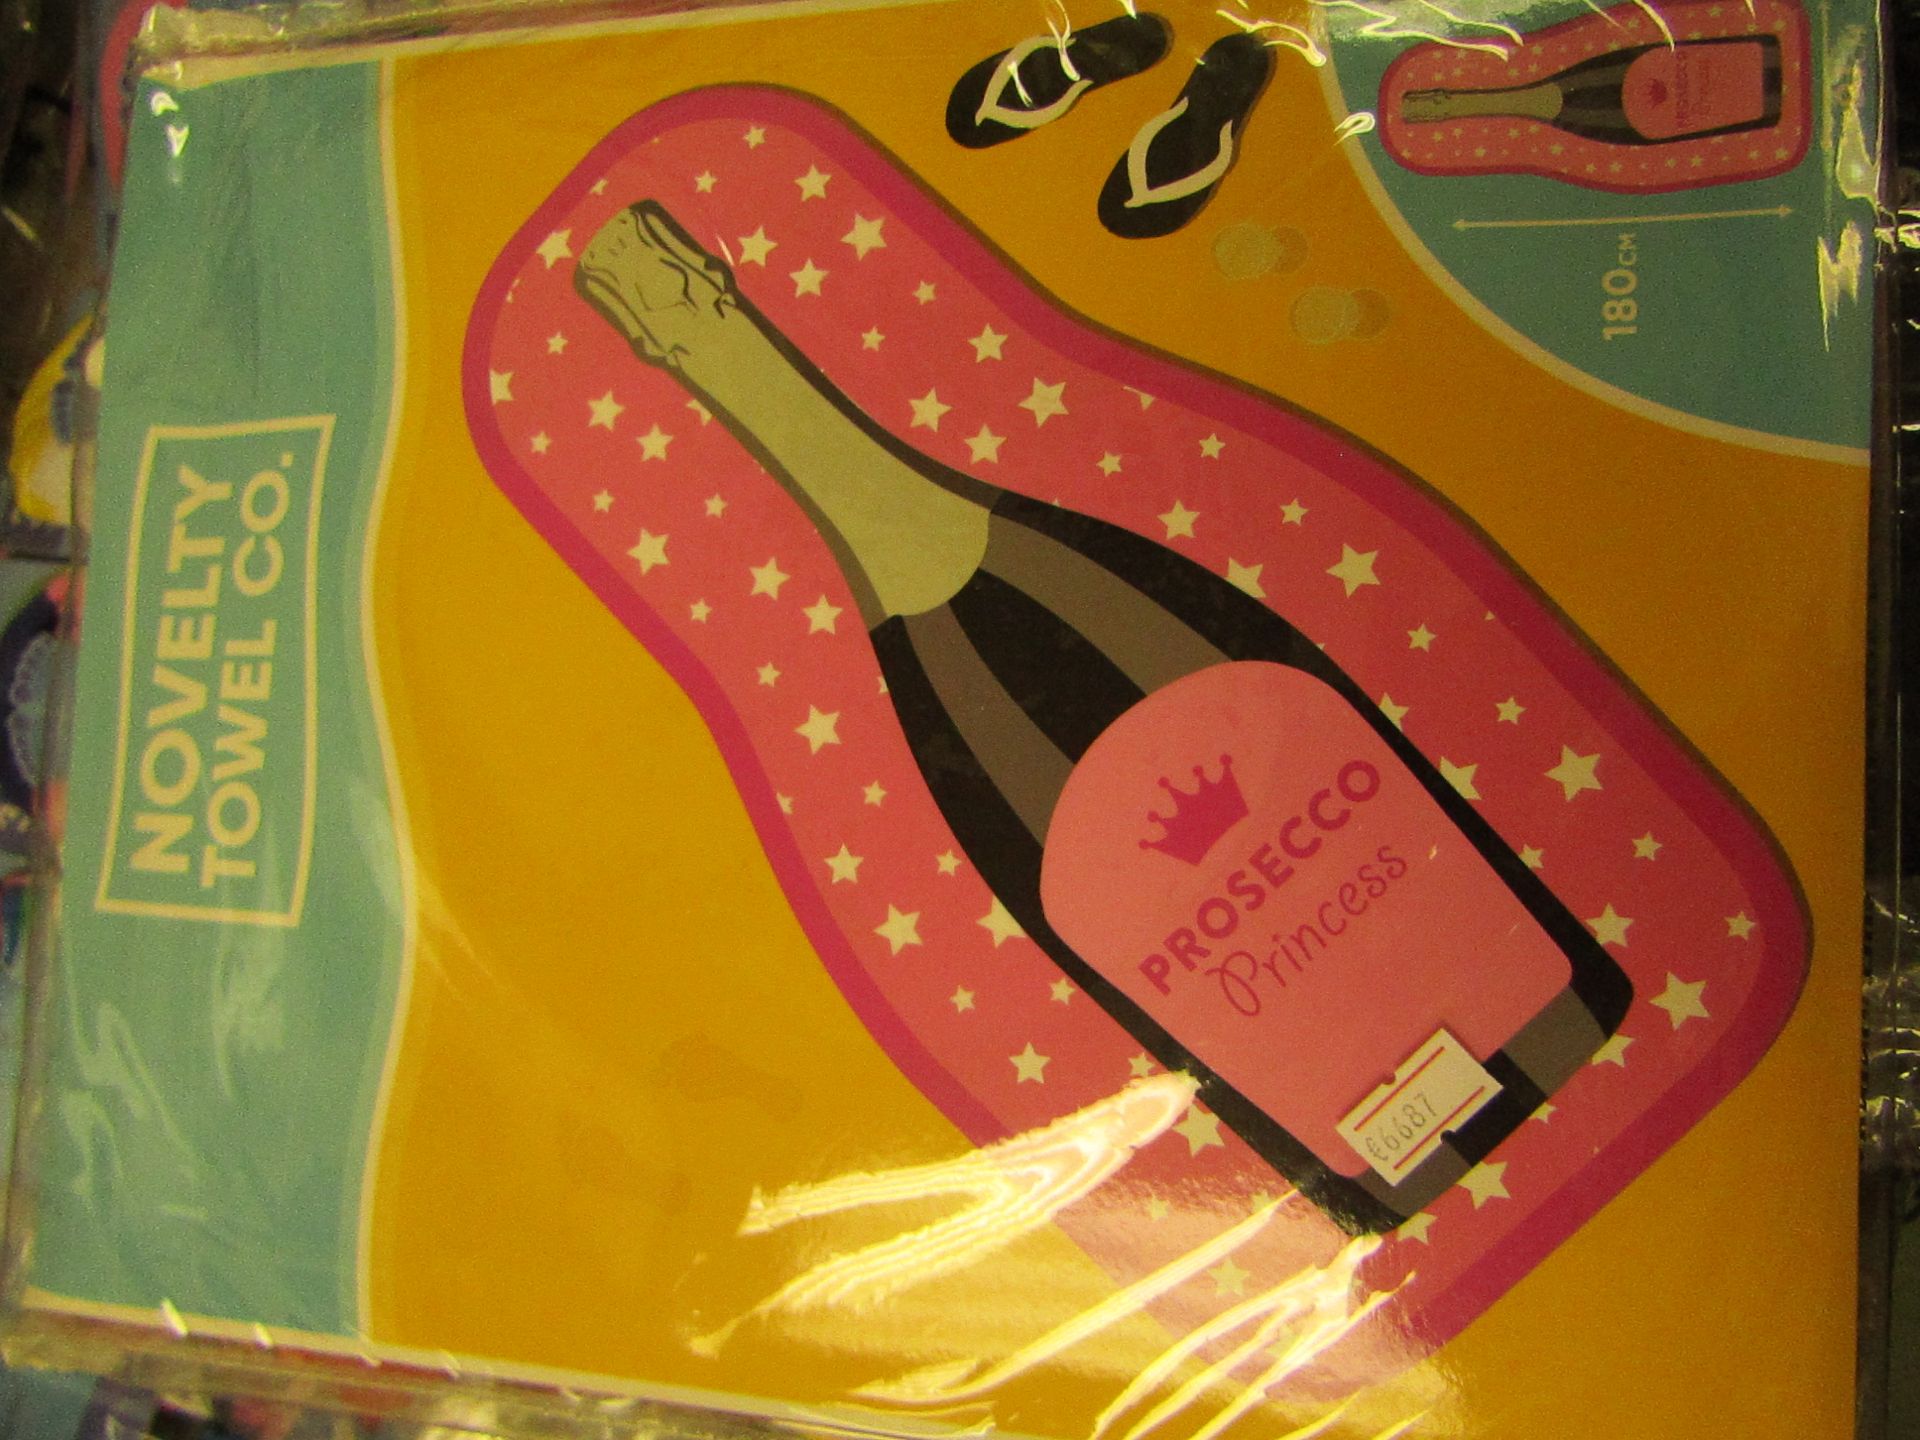 1 x Novelty Towel Co. Prosecco Princes Towel 91cm by 180cm new & packaged